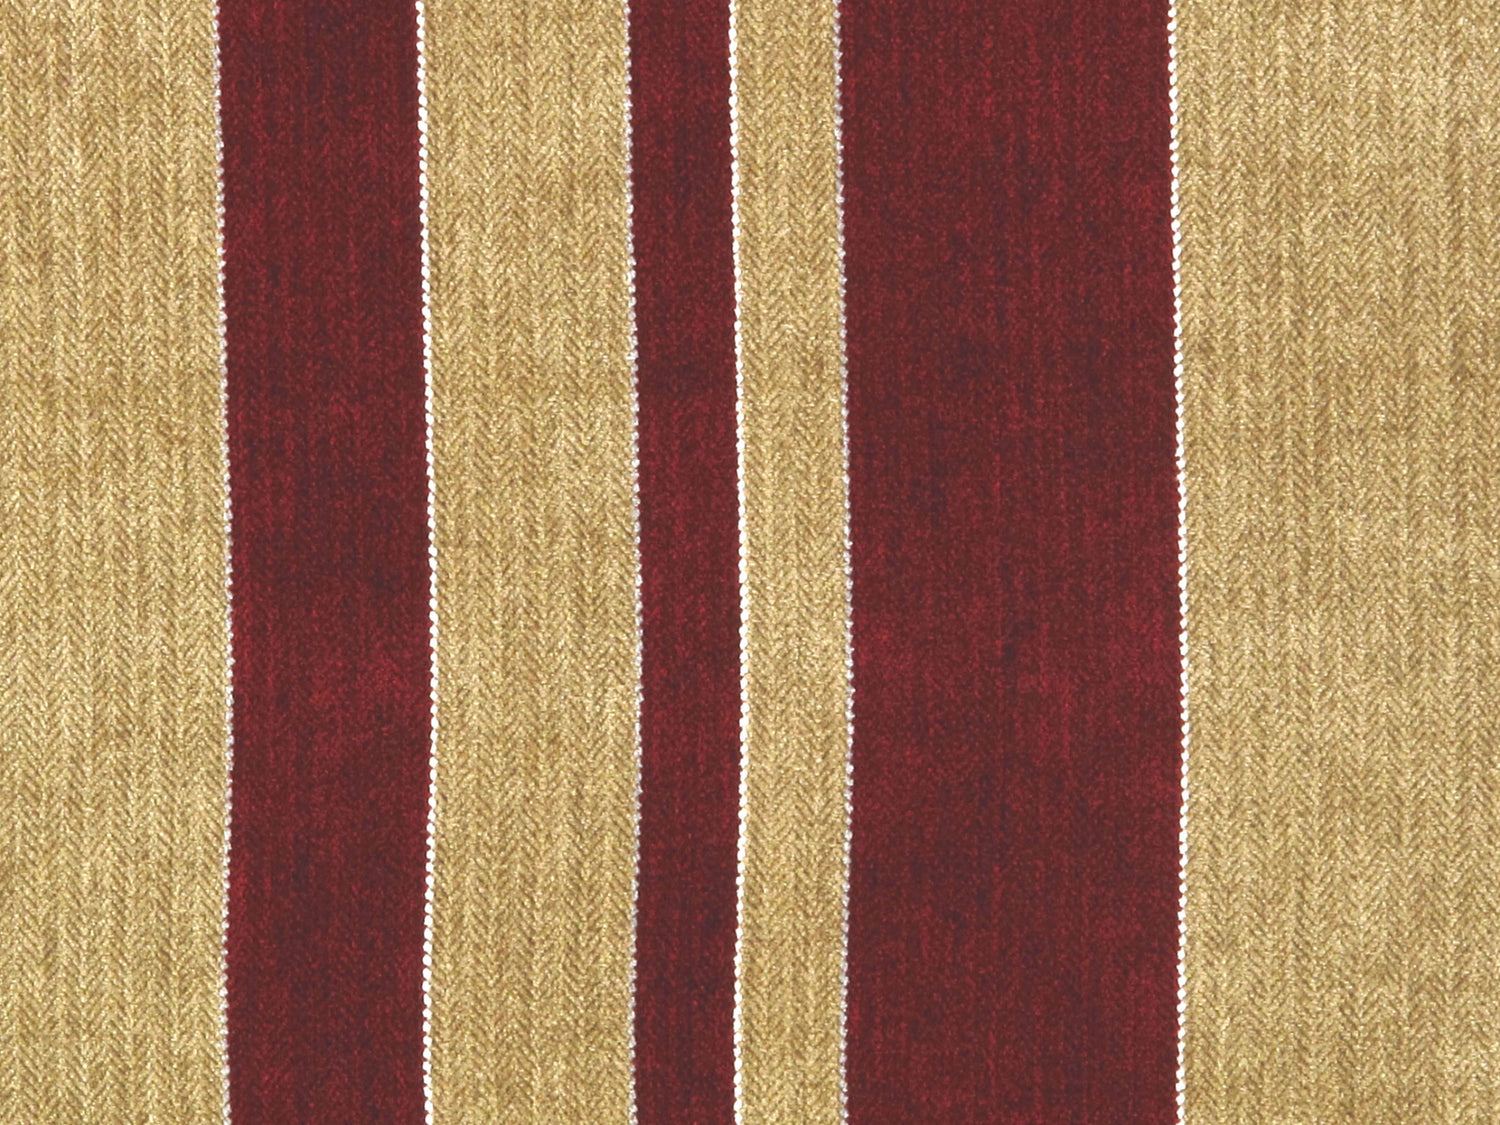 Pedra fabric in burgundy/bronze color - pattern number LU 00038187 - by Scalamandre in the Old World Weavers collection